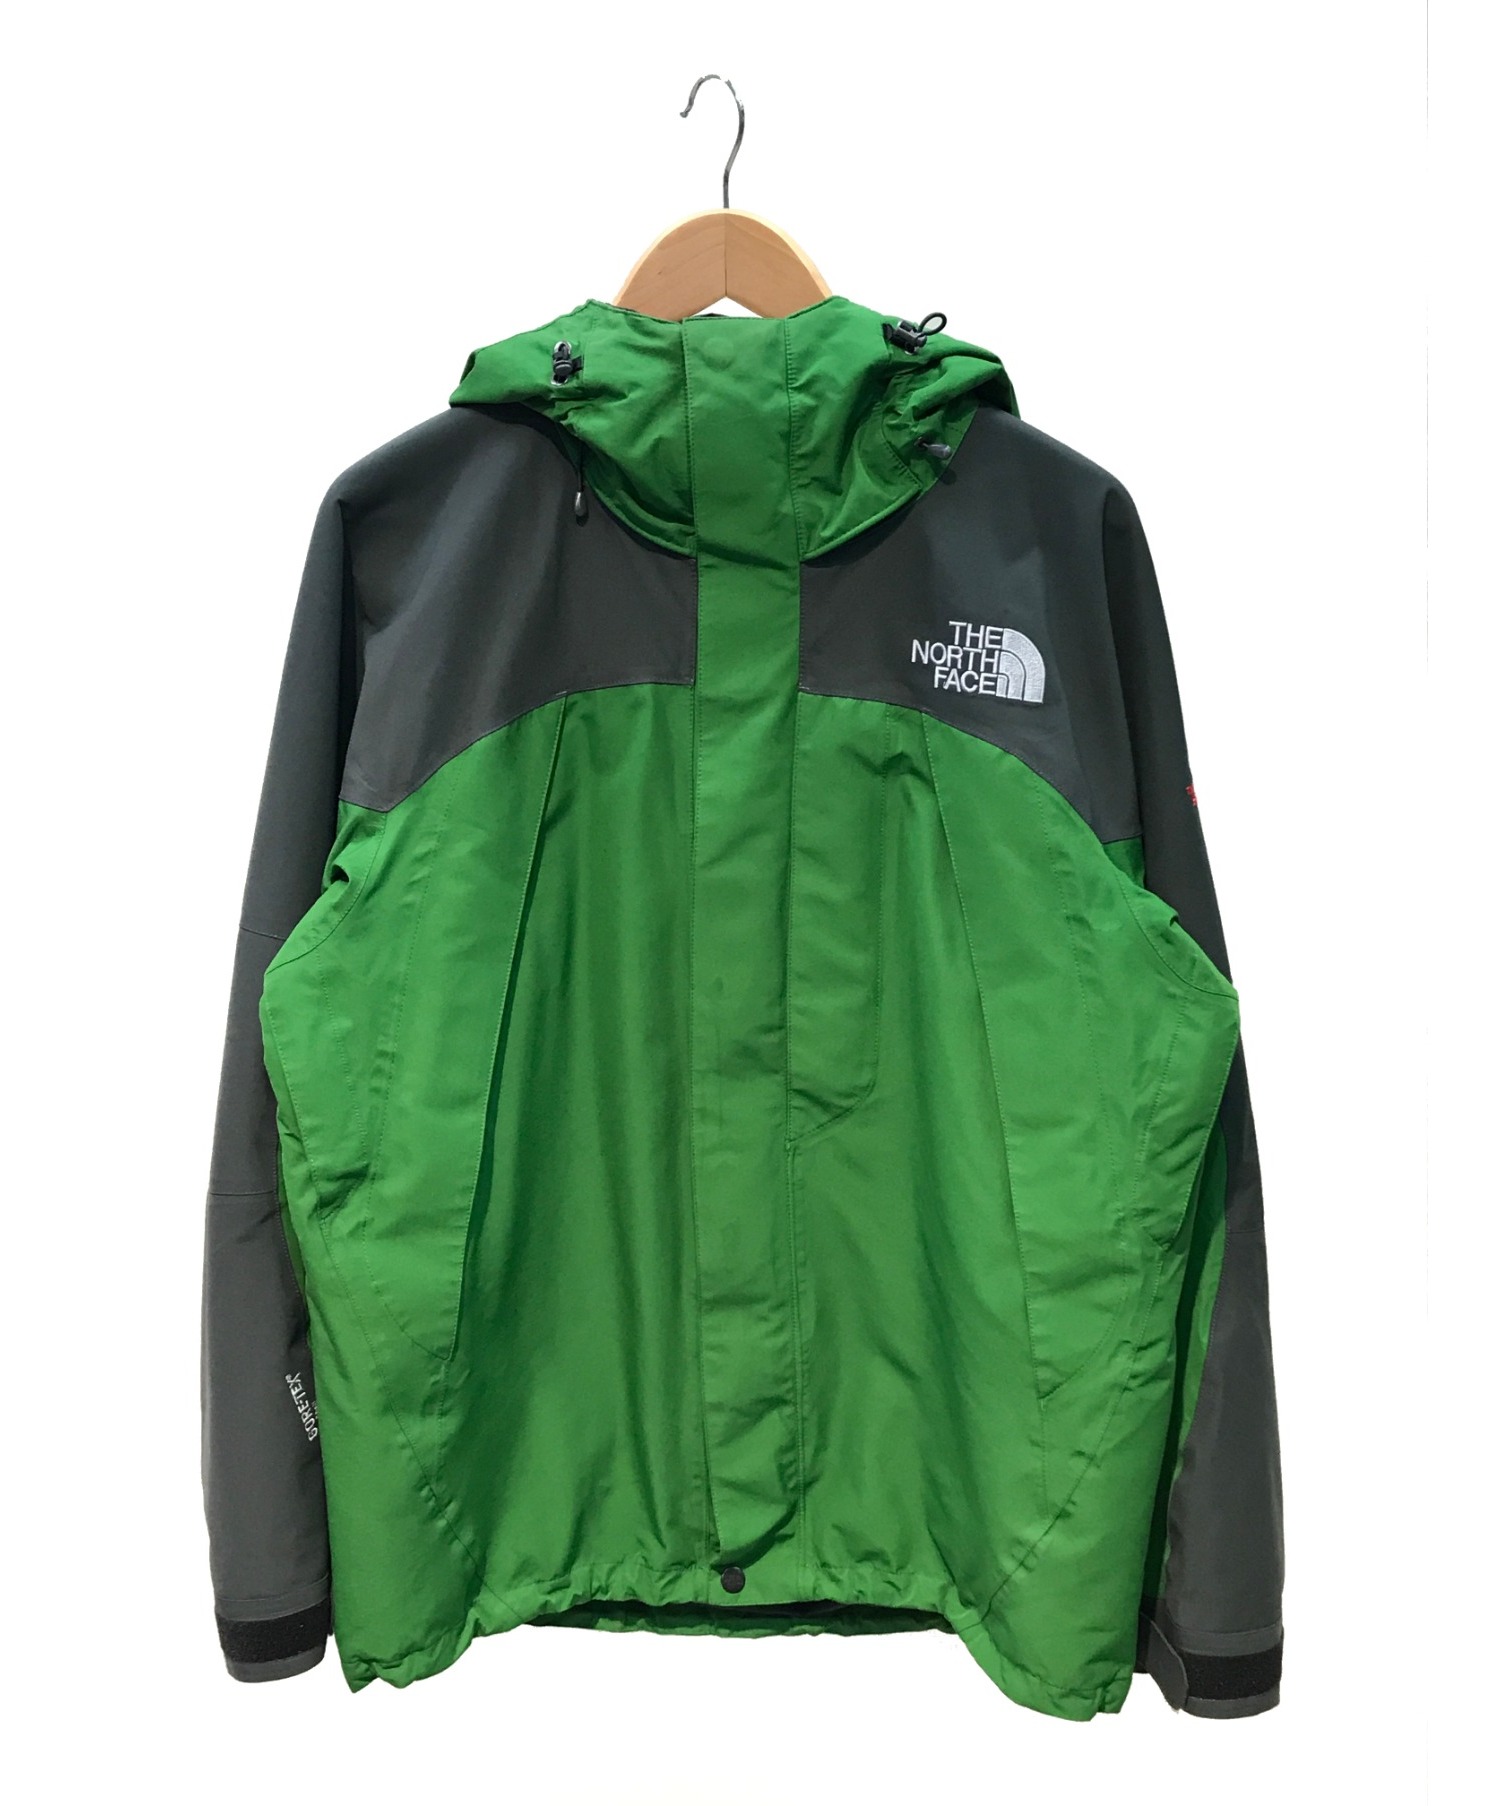 THE NORTH FACE - THE NORTH FACE マウンテンパーカー メンズ ナイロン